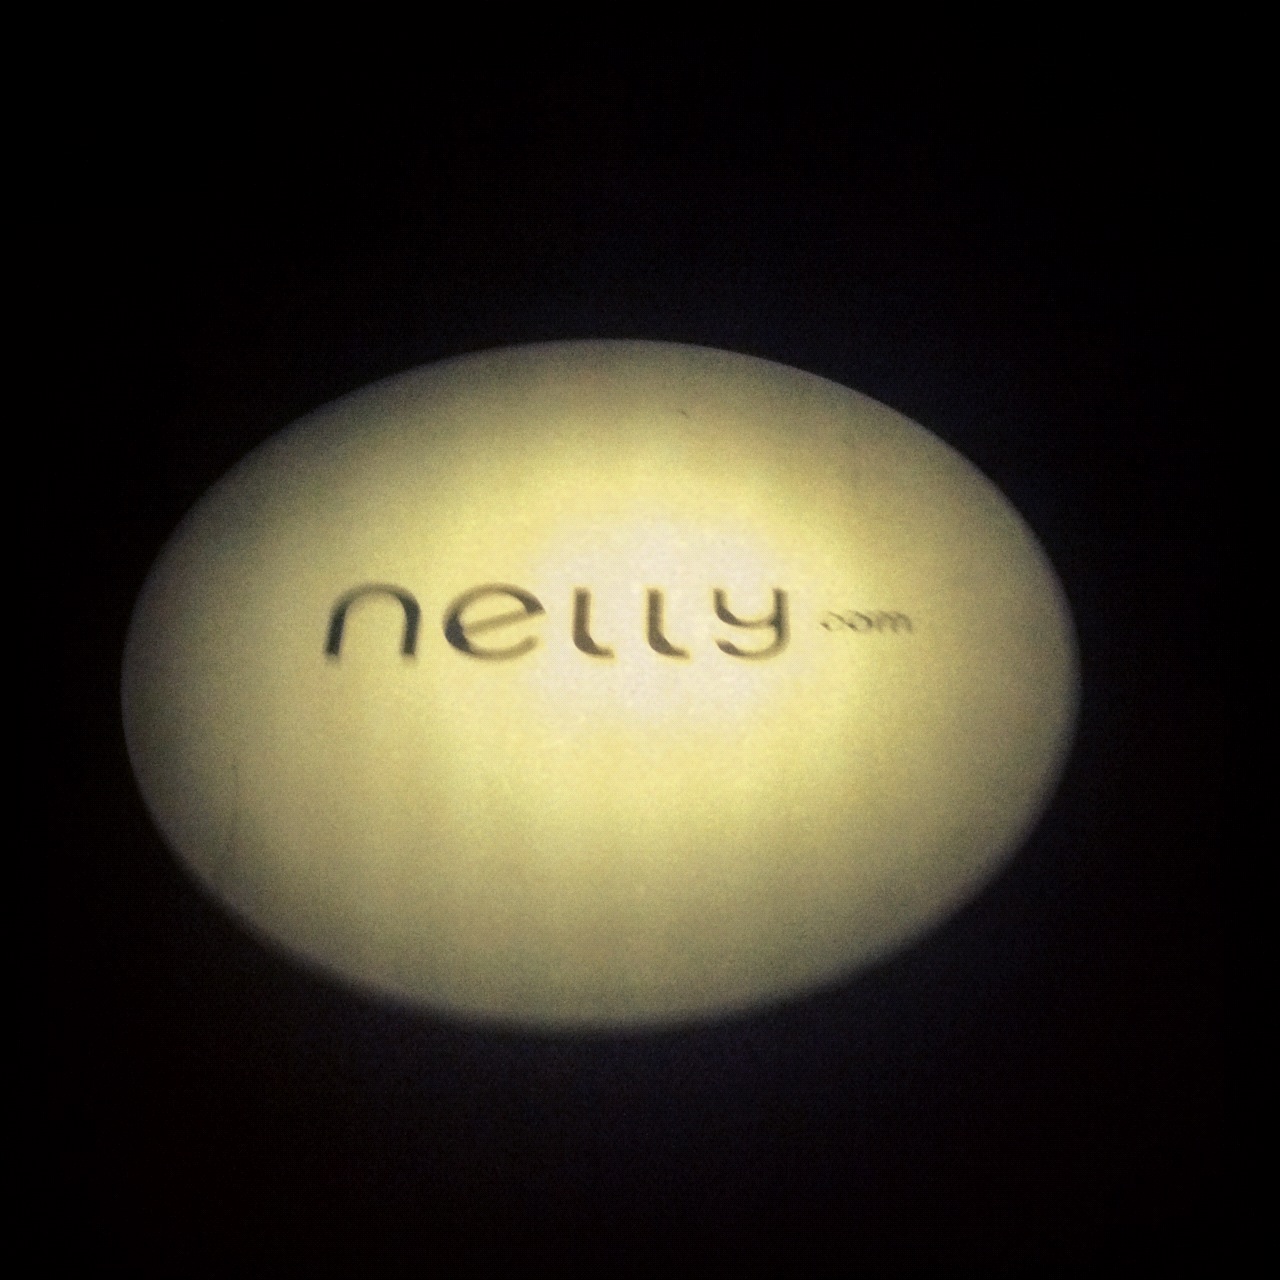 Launch of Nelly.com UK